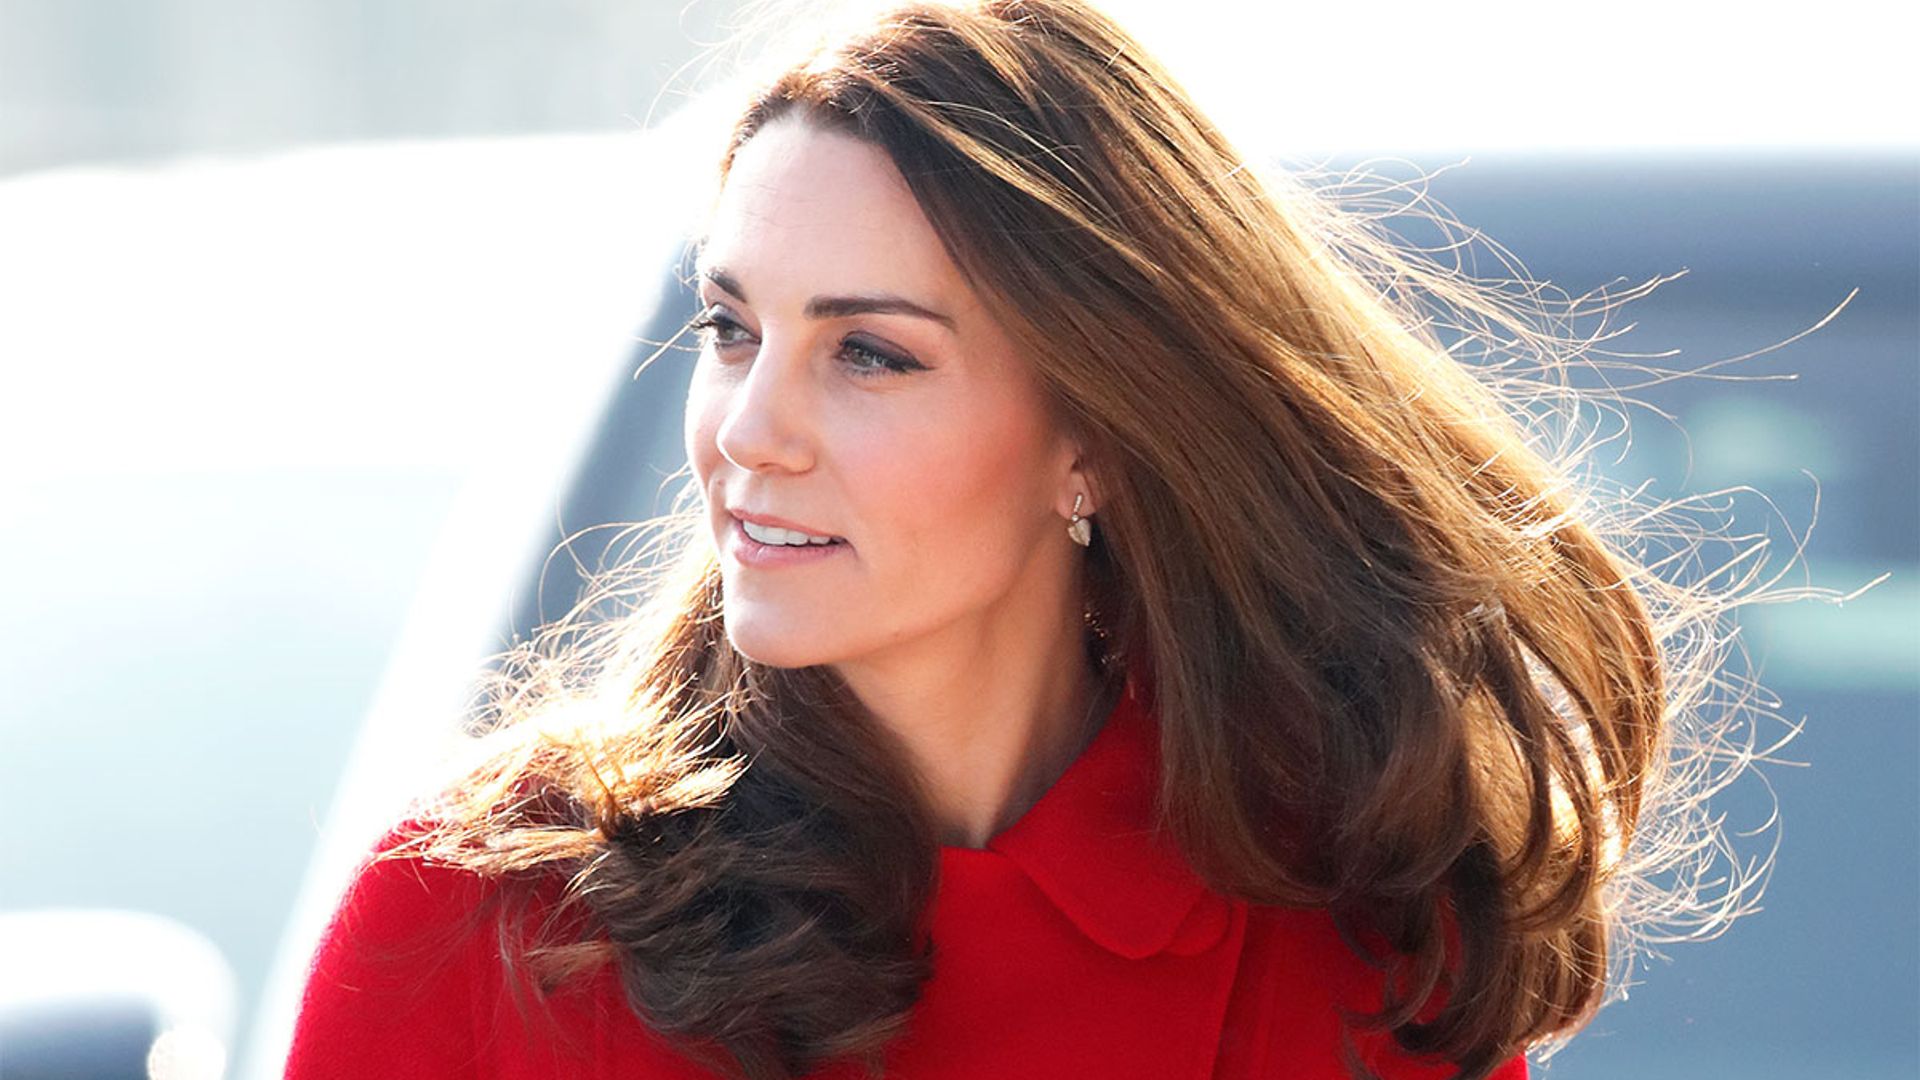 Remember when Kate Middleton wore THAT Gucci dress? We have found